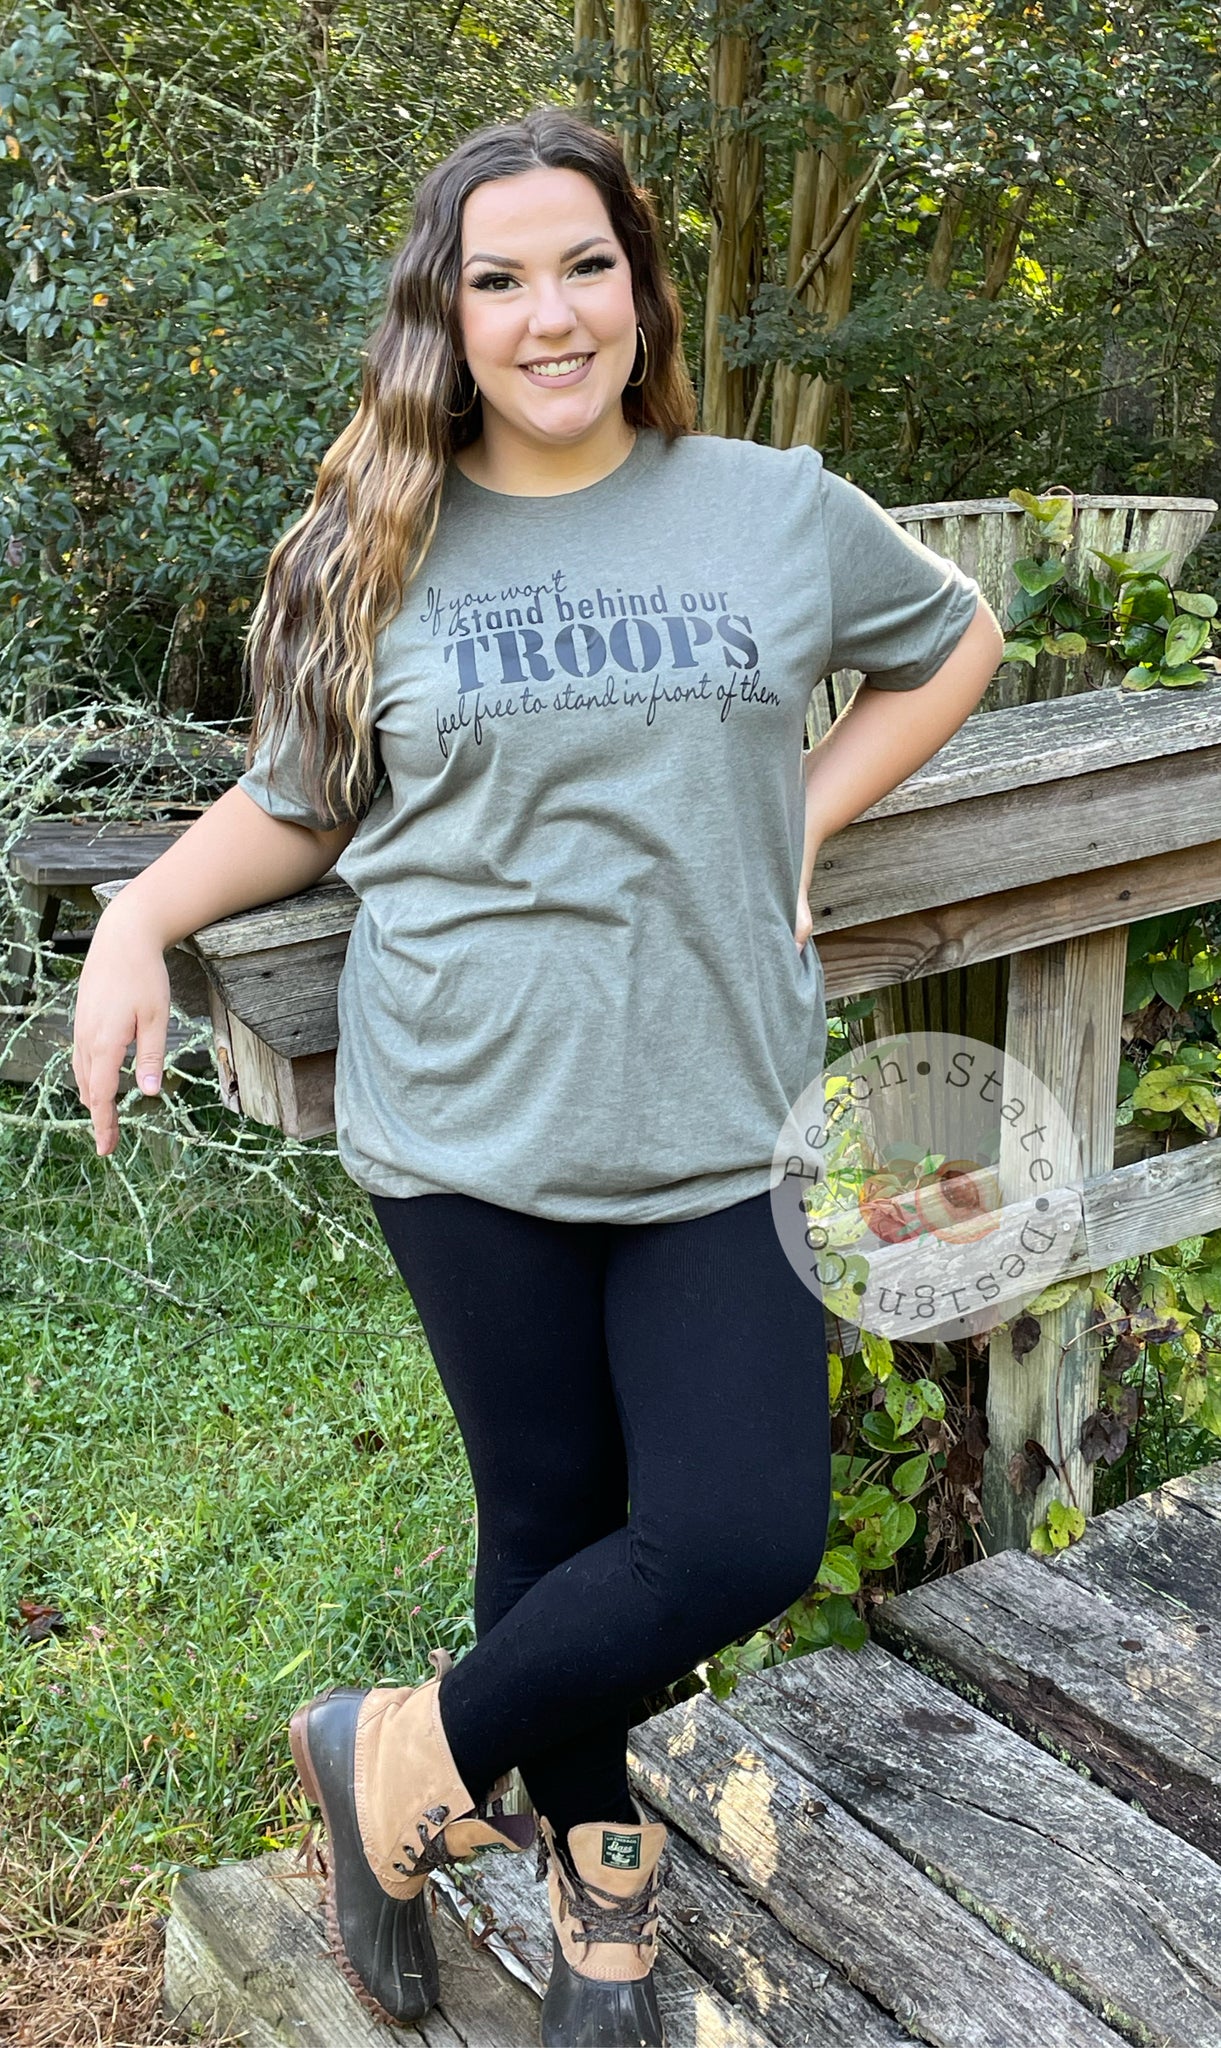 If you won’t stand behind our troops, feel free to stand in front of them